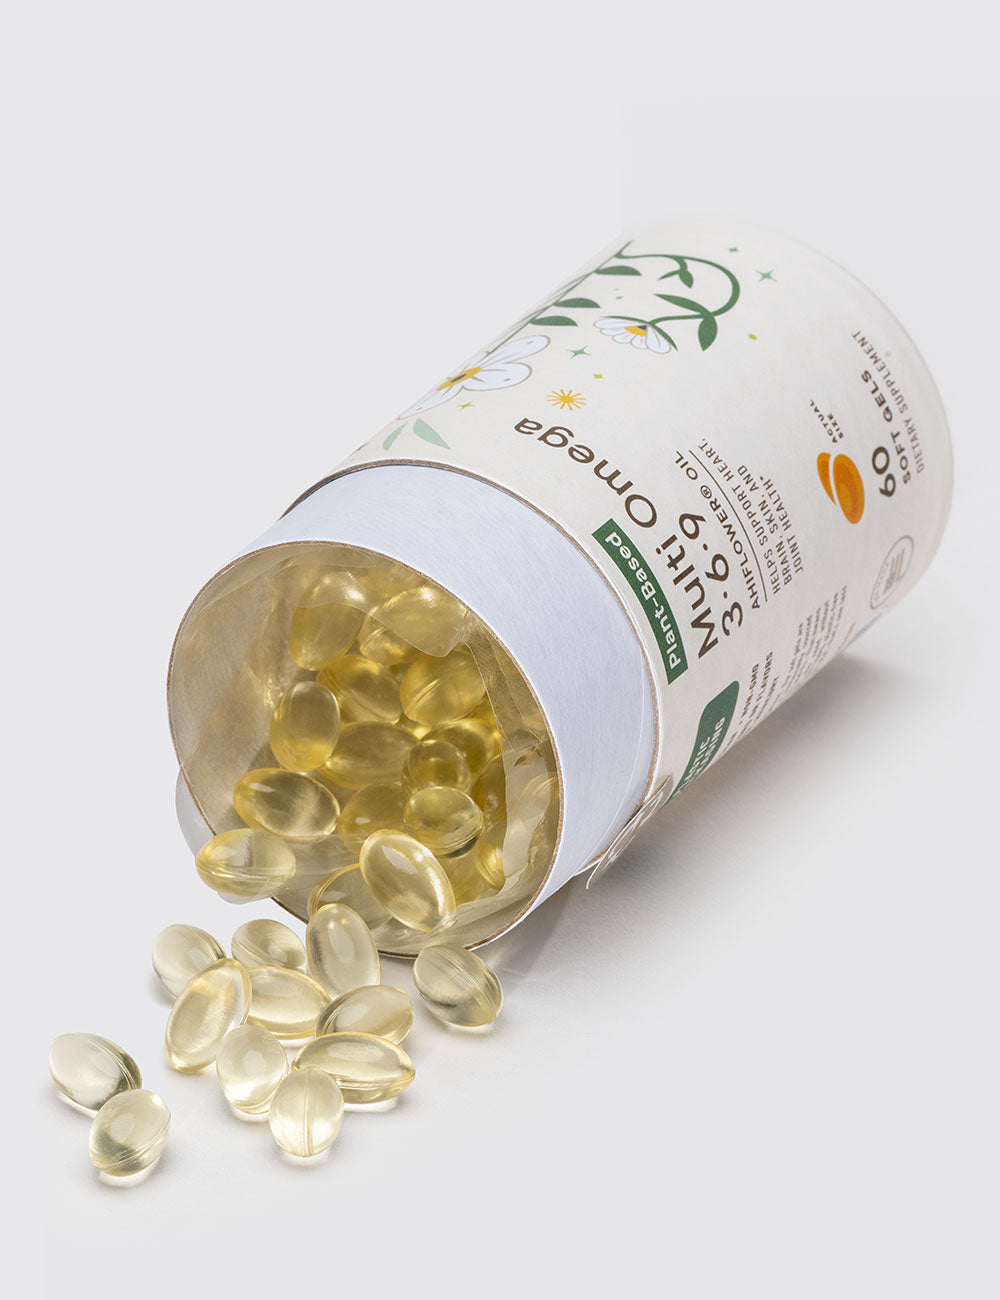 Multi Omega 3-6-9 with Ahiflower Oil Soft Gels